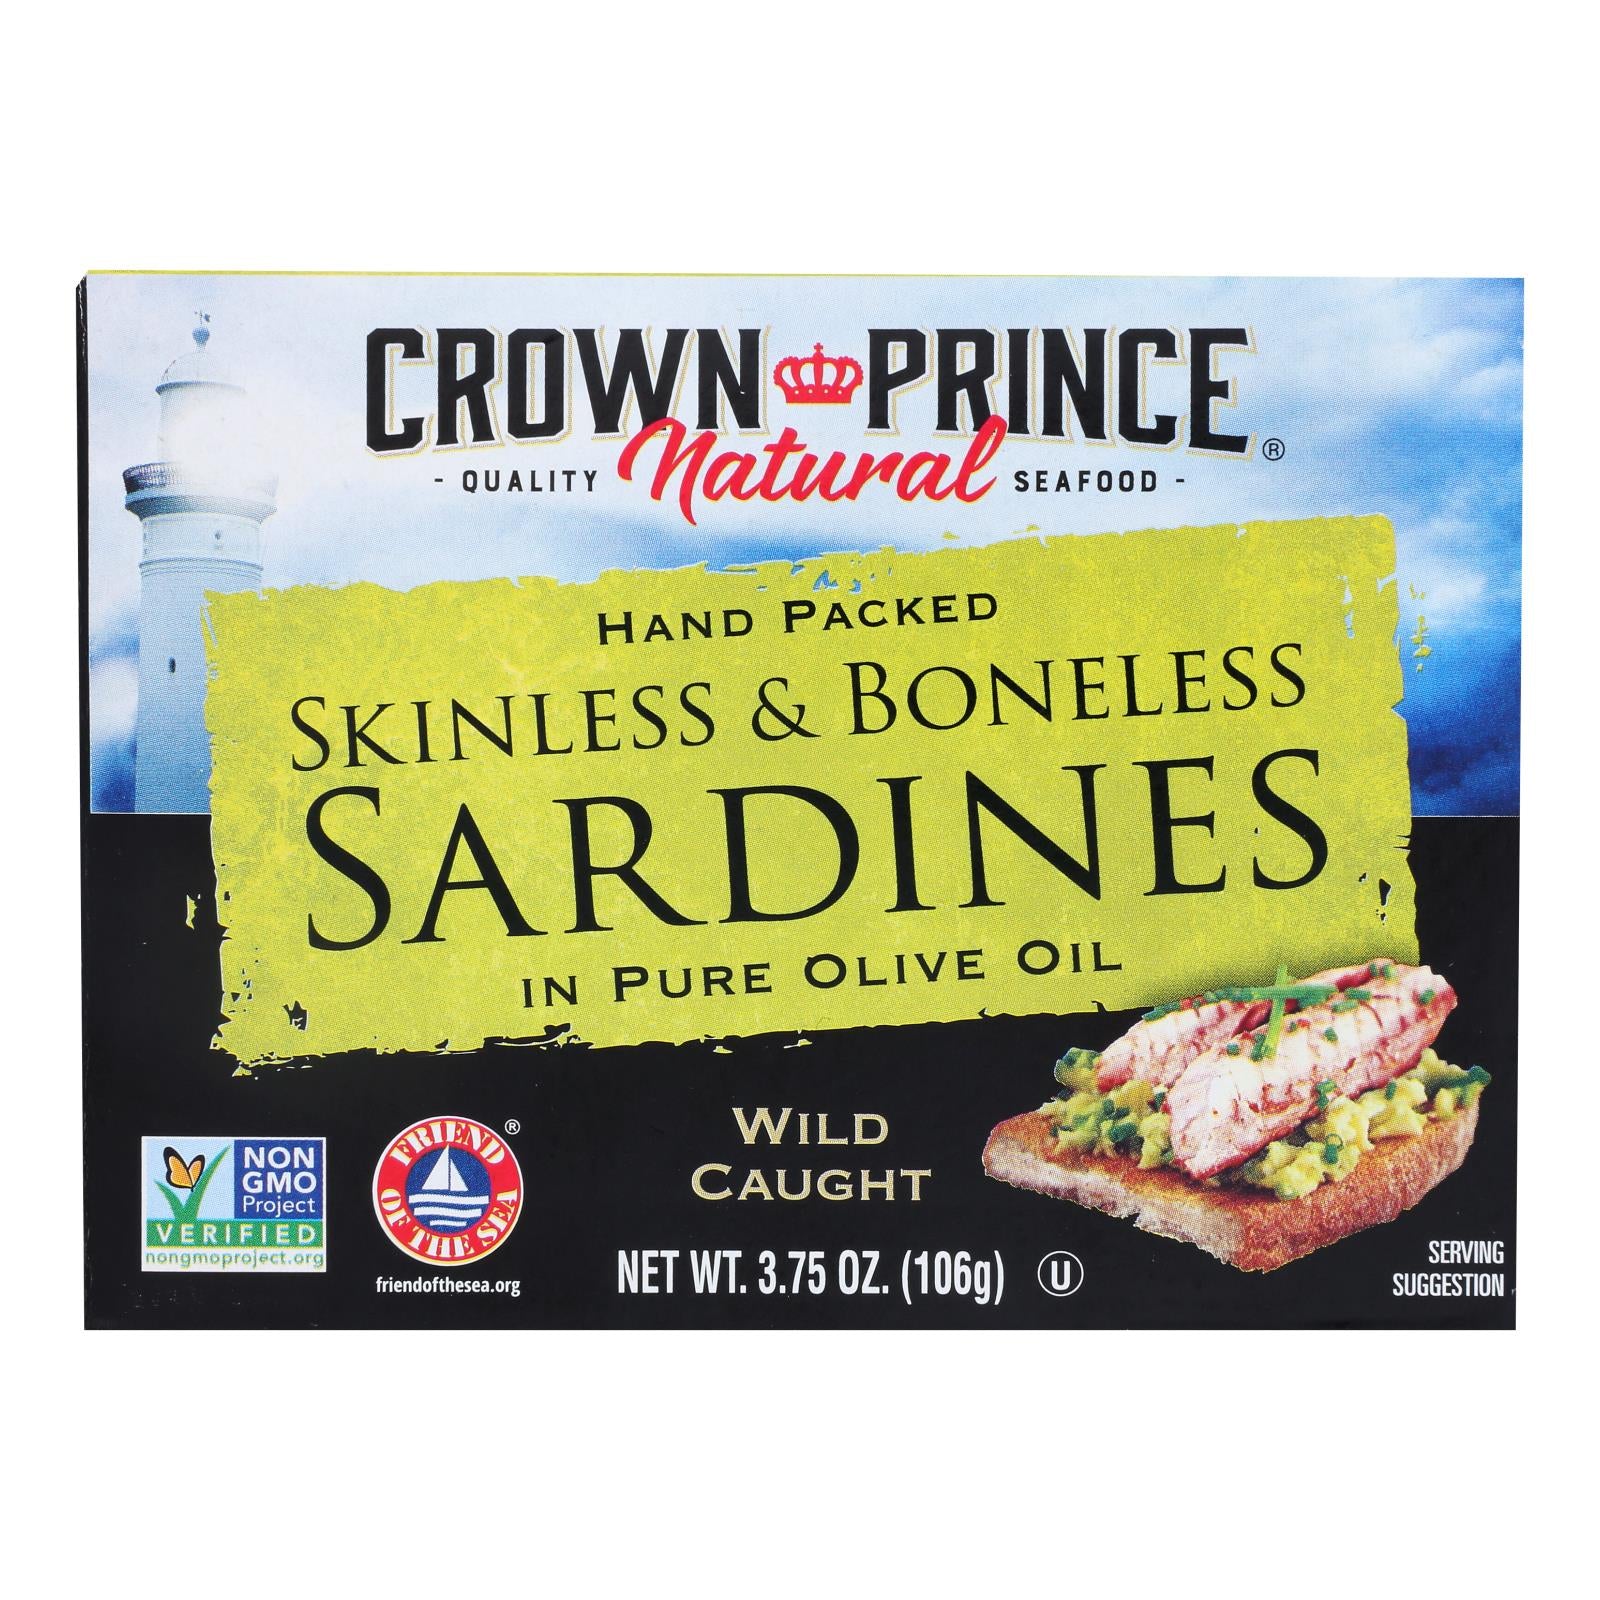 Crown Prince Skinless And Boneless Sardines In Pure Olive Oil - Case Of 12 - 3.75 Oz.